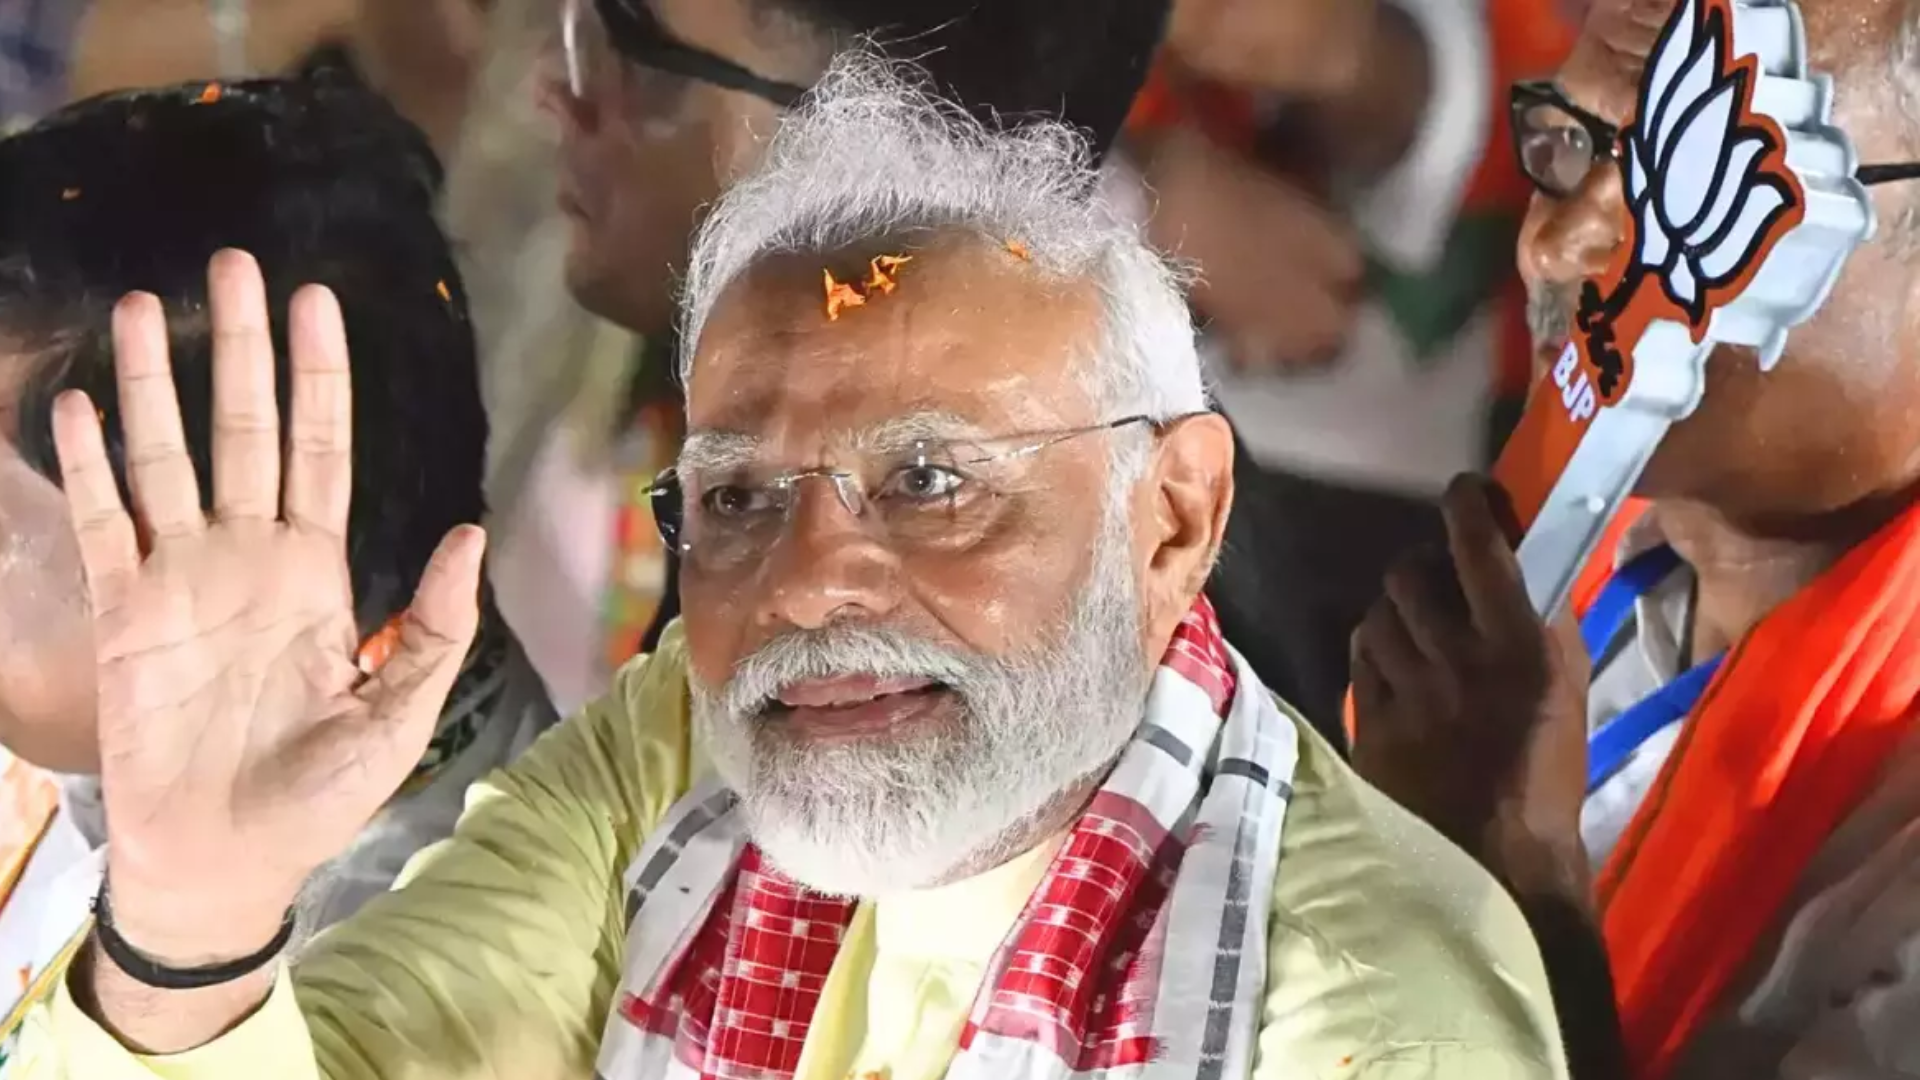 PM Modi In Varanasi: What Is Special For Framers On This Visit?